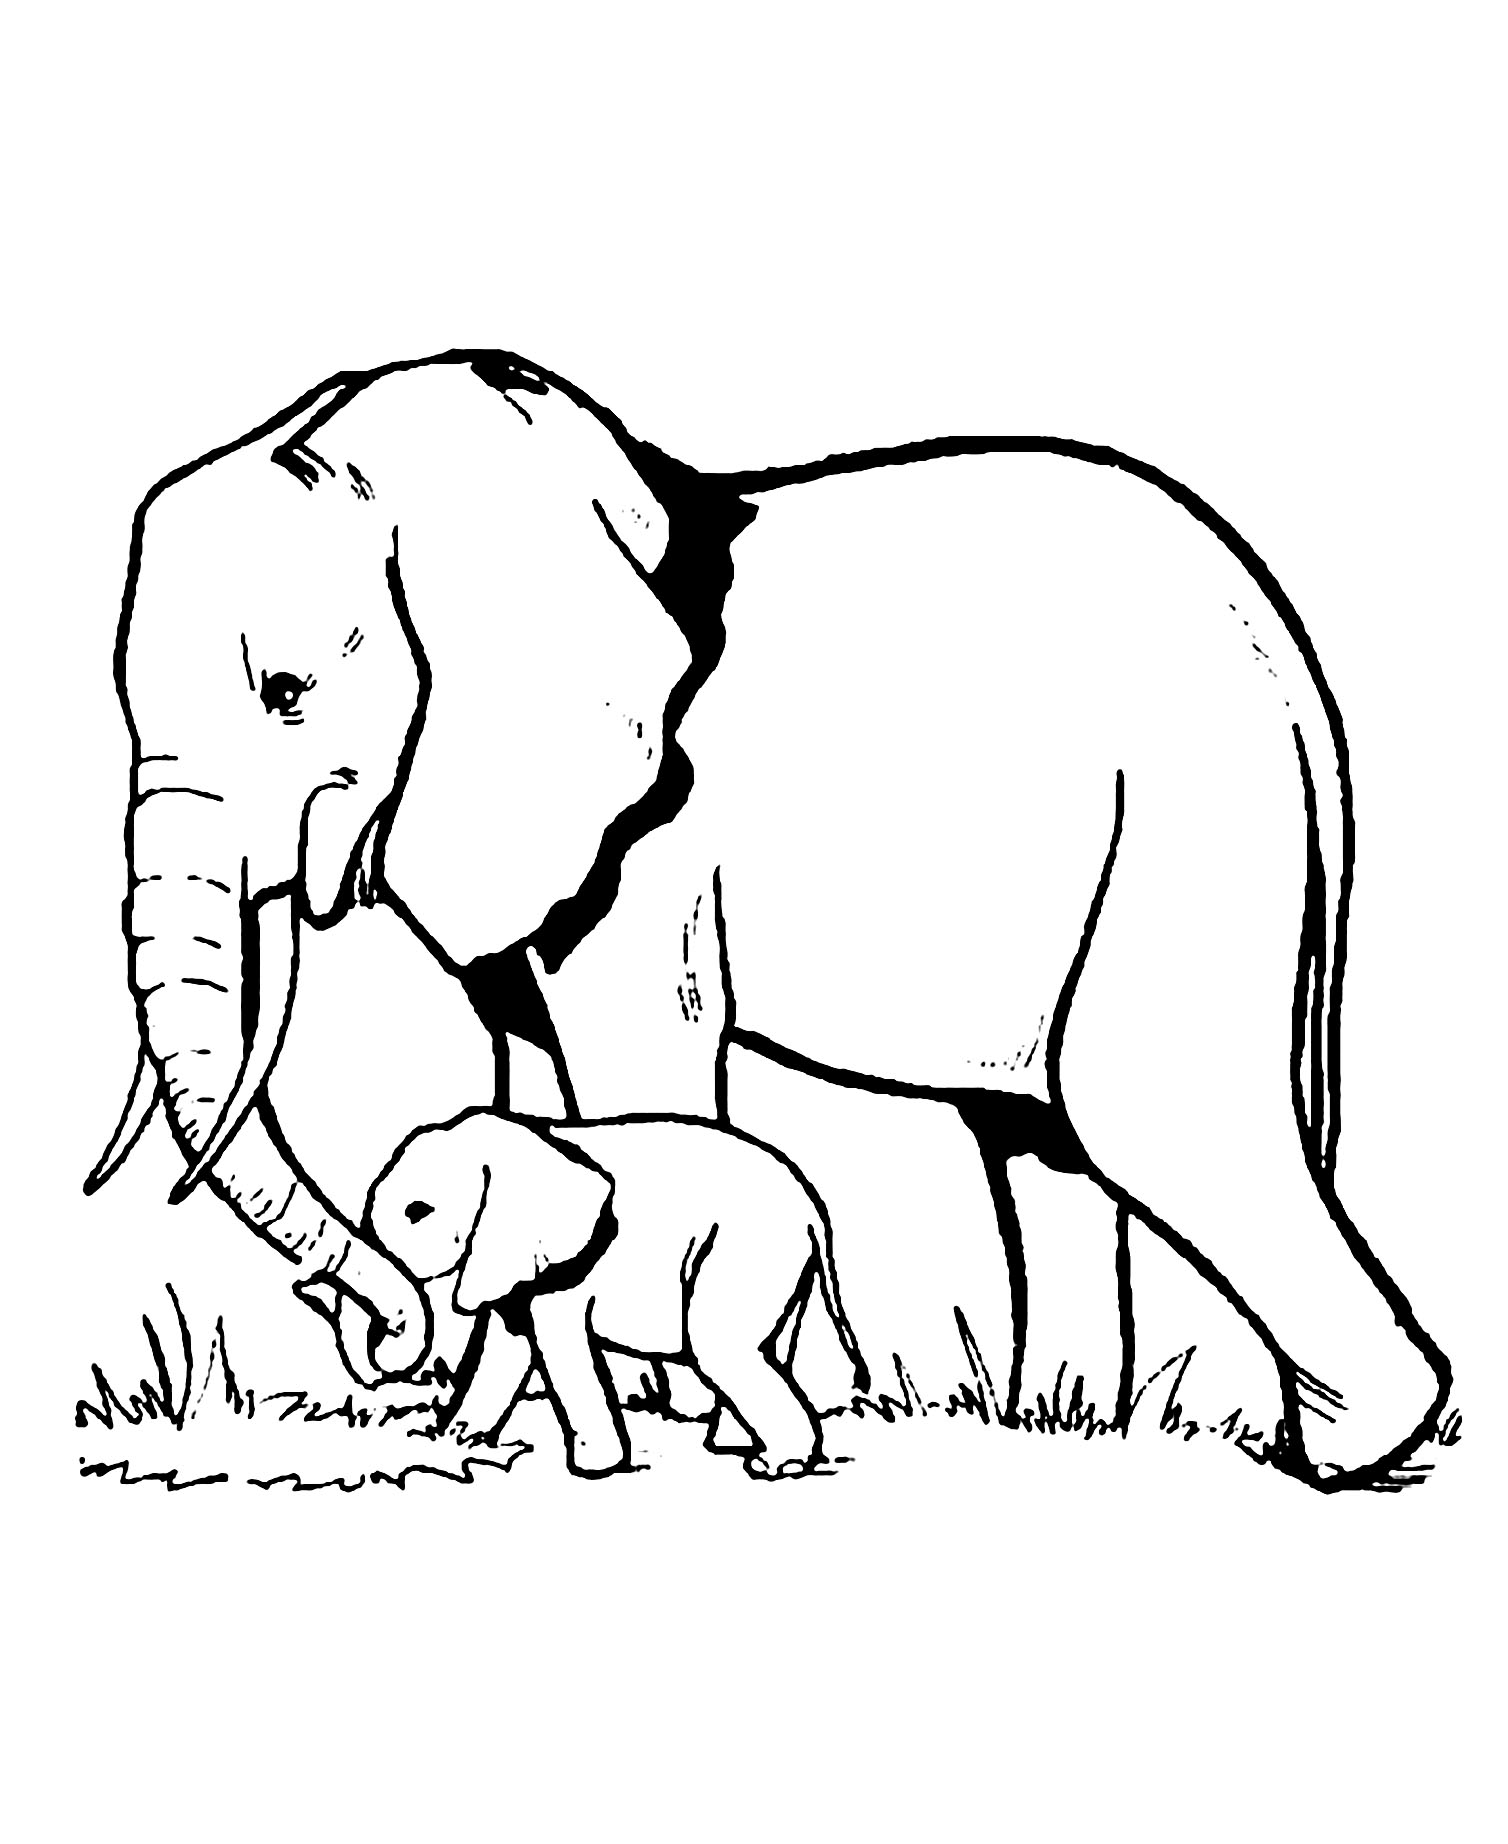 Elephant coloring pages to download for free - Elephants Kids Coloring Pages